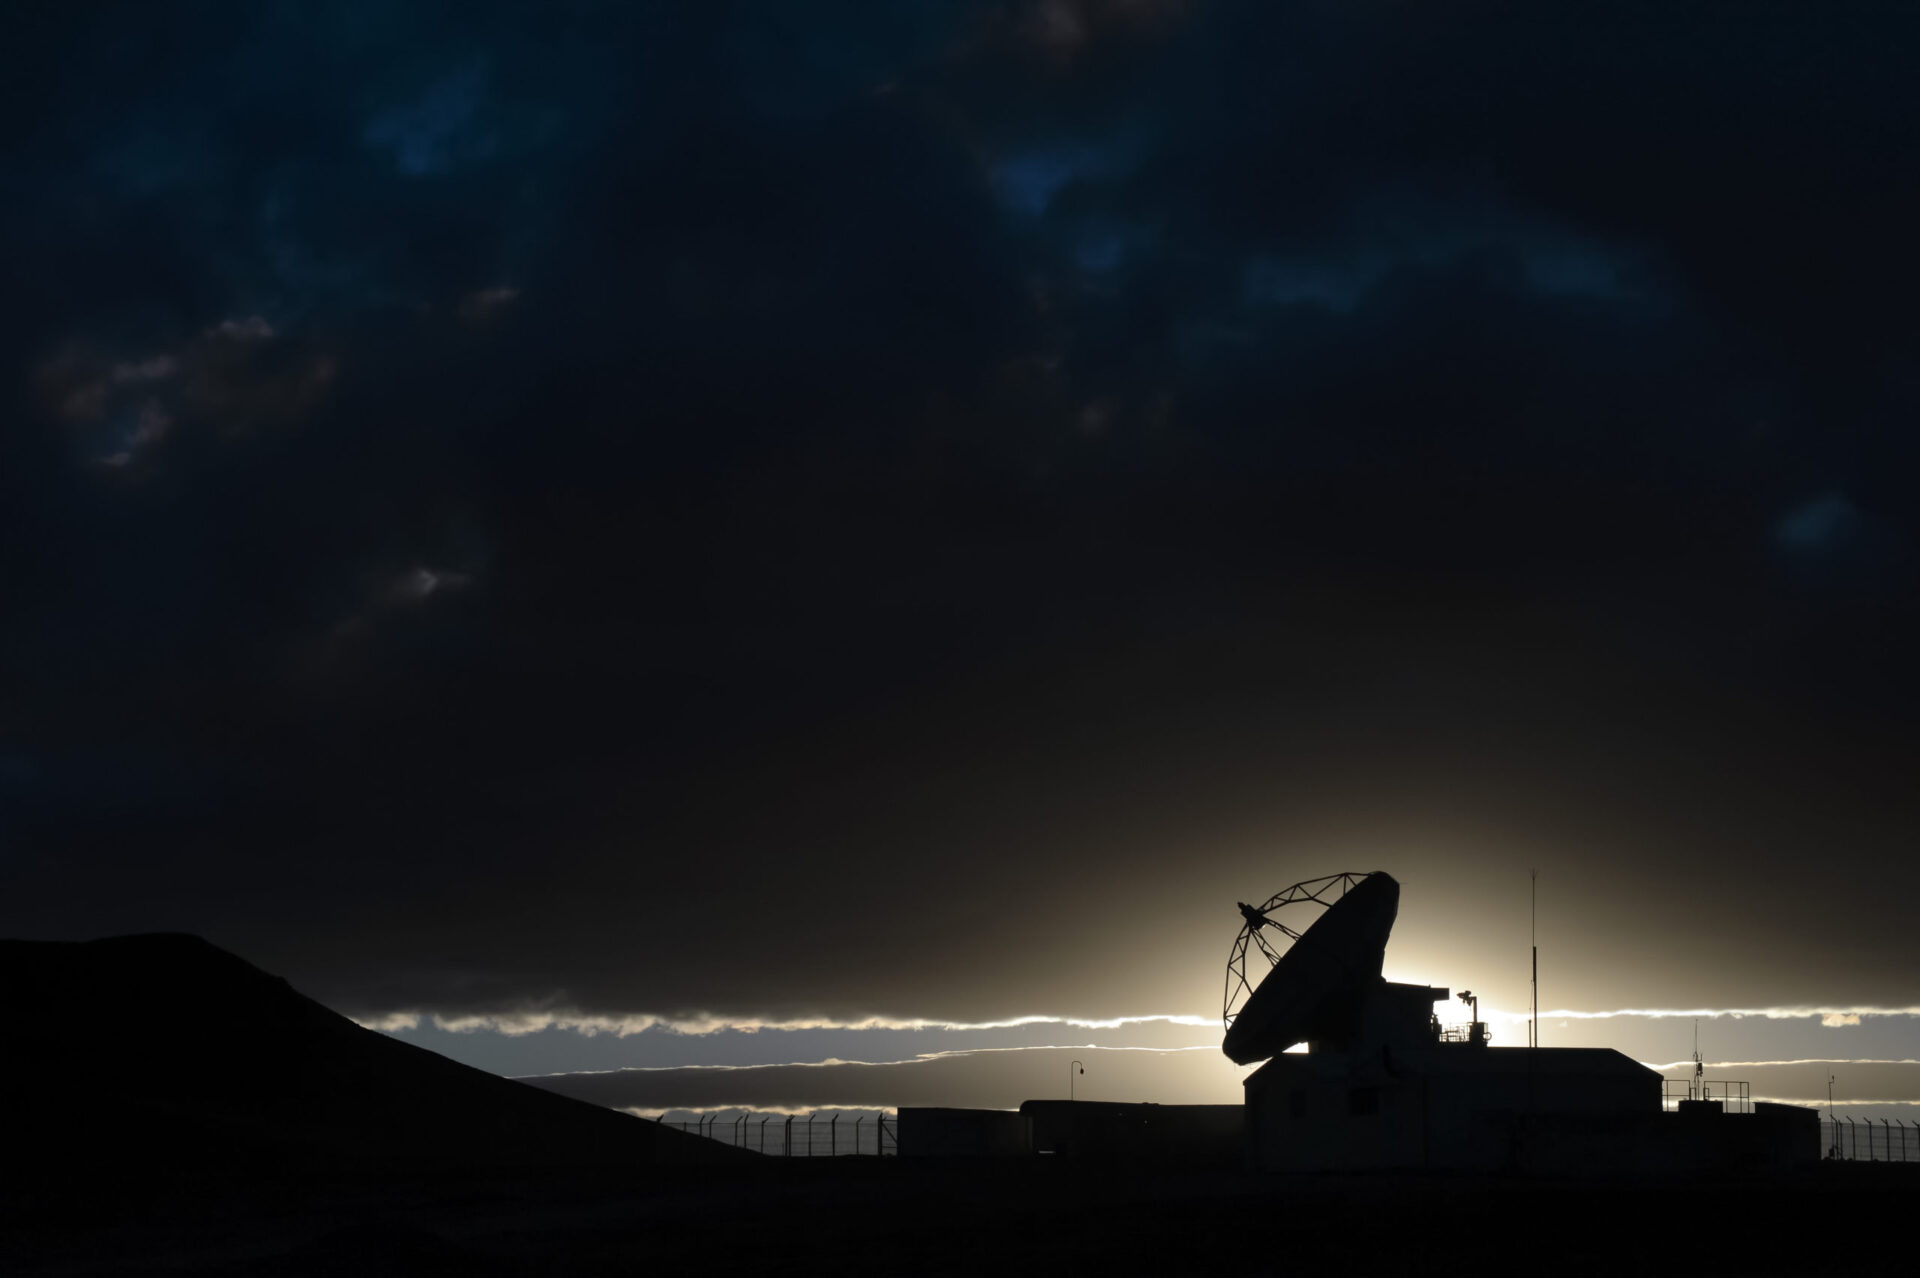 This silhouette shows one of the ALMA antennas